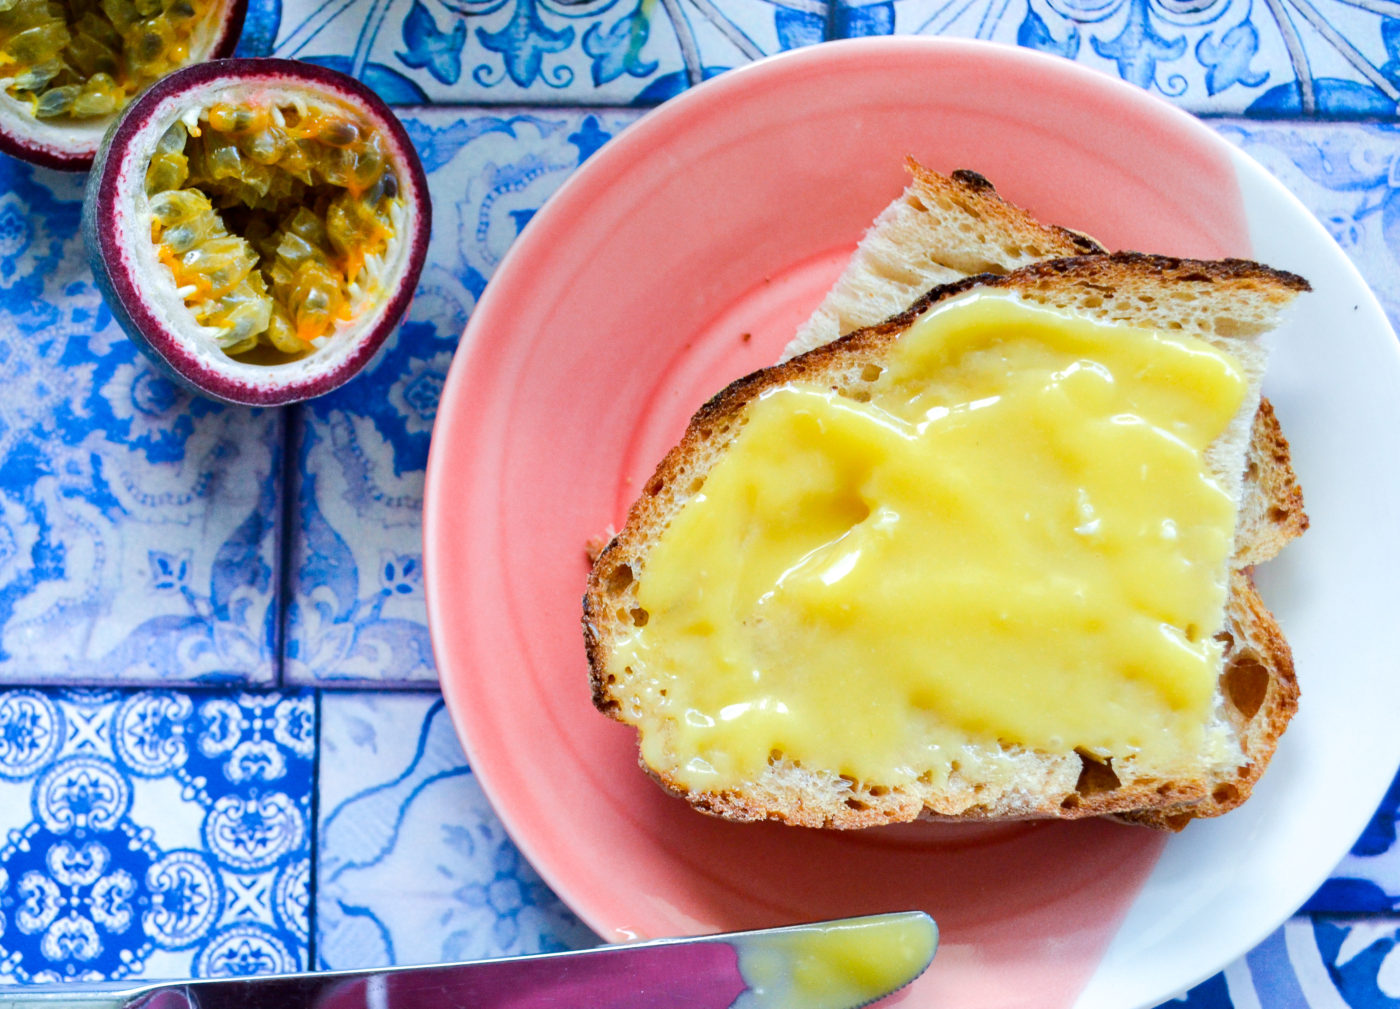 How to make passionfruit curd